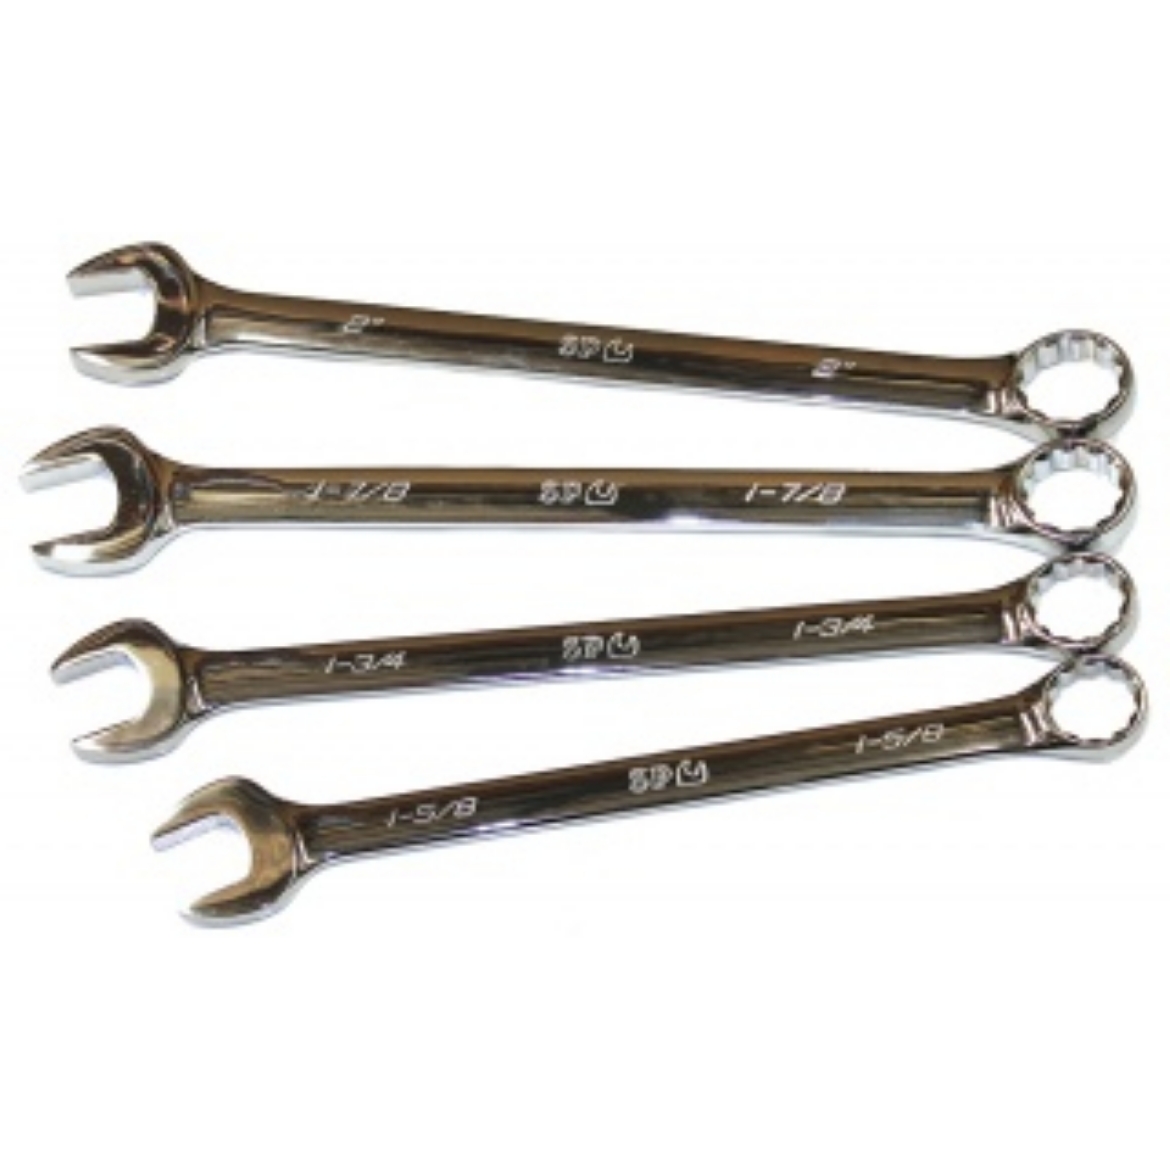 Picture of SET SPANNER ROE JUMBO 4PC SAE SP TOOLS - Set Includes: 1-5/8, 1-3/4, 1-7/8 & 2”